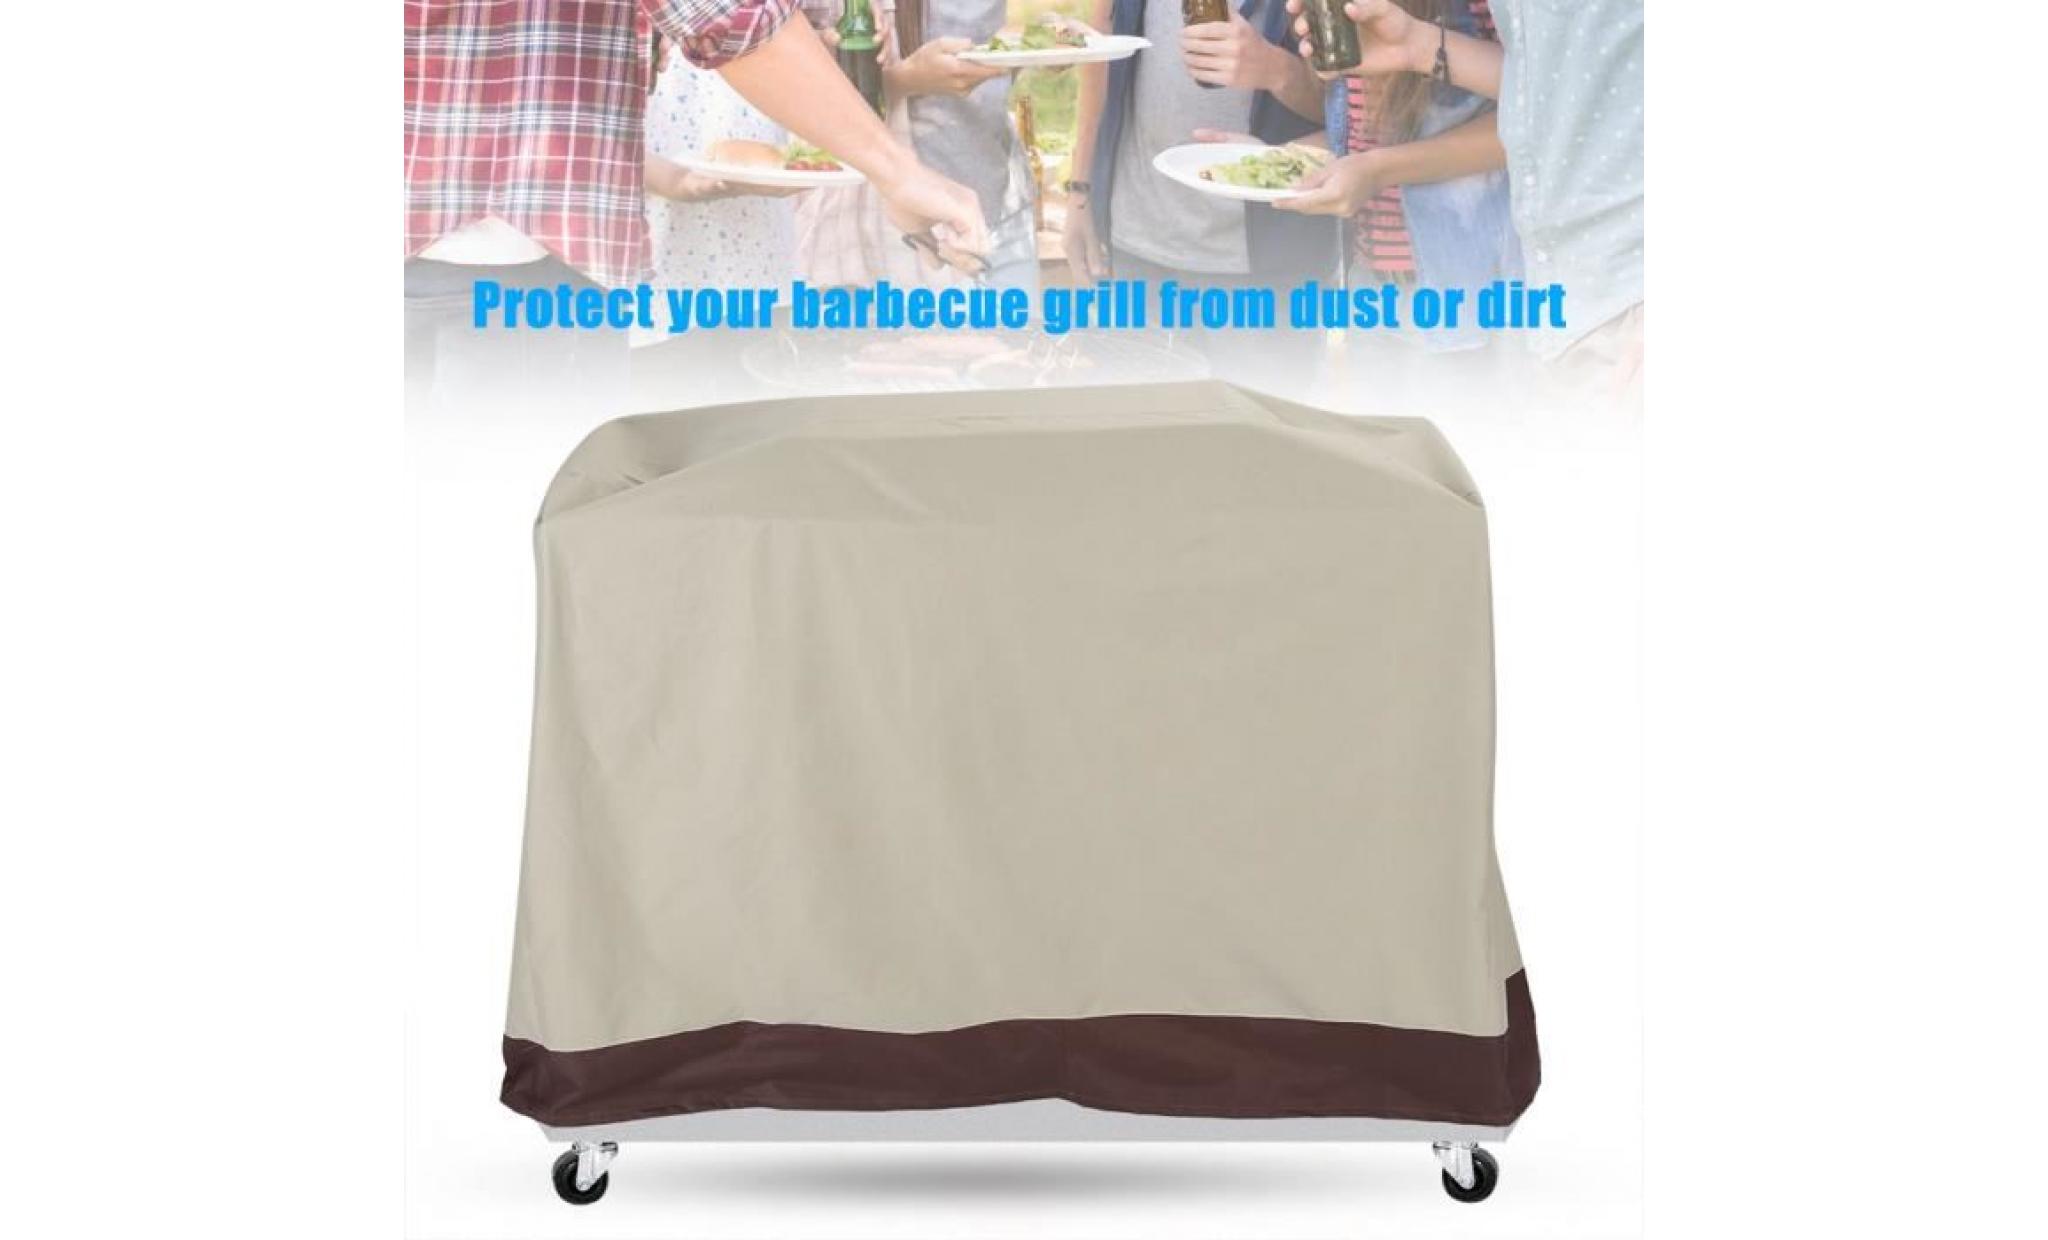 housse barbecue bbq couvercle barbecue protection 145 * 61 * 117cm